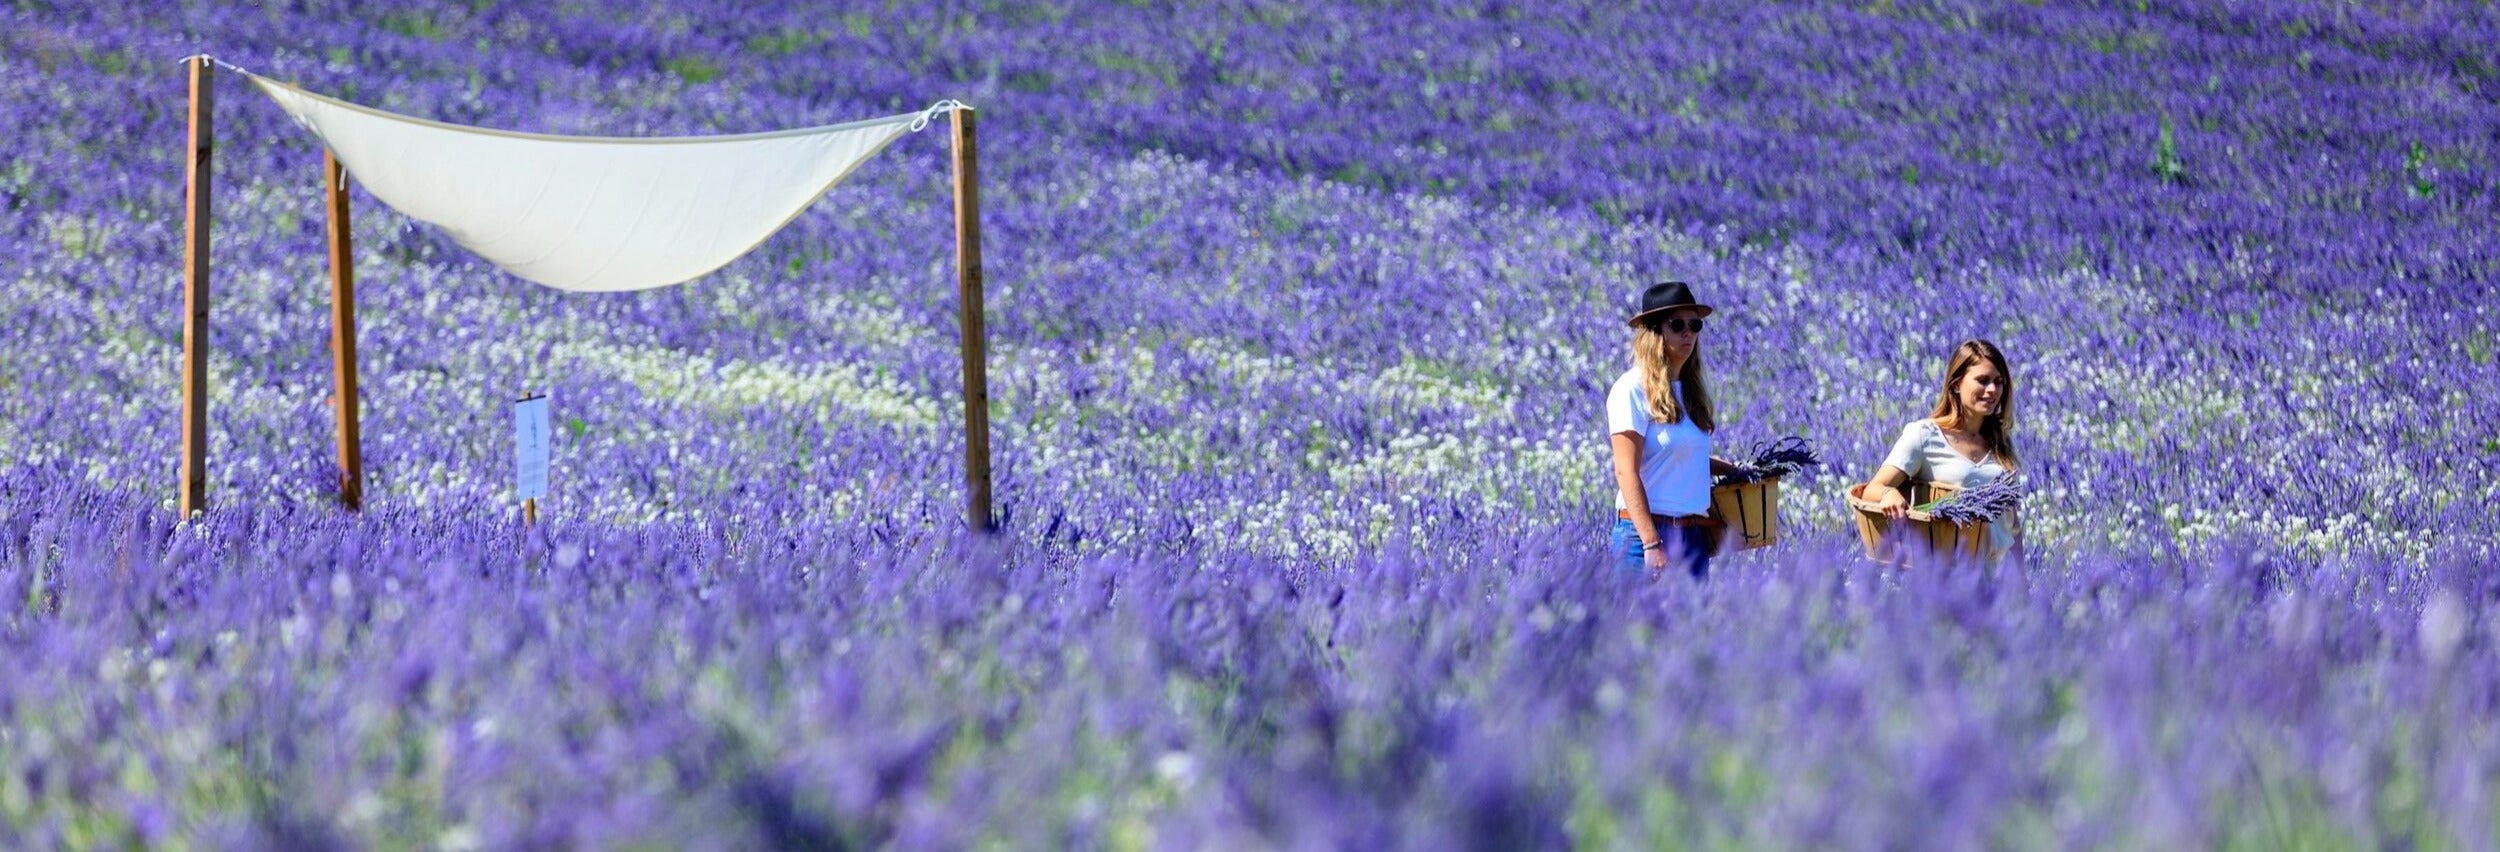 Entrance to Lavender Fields